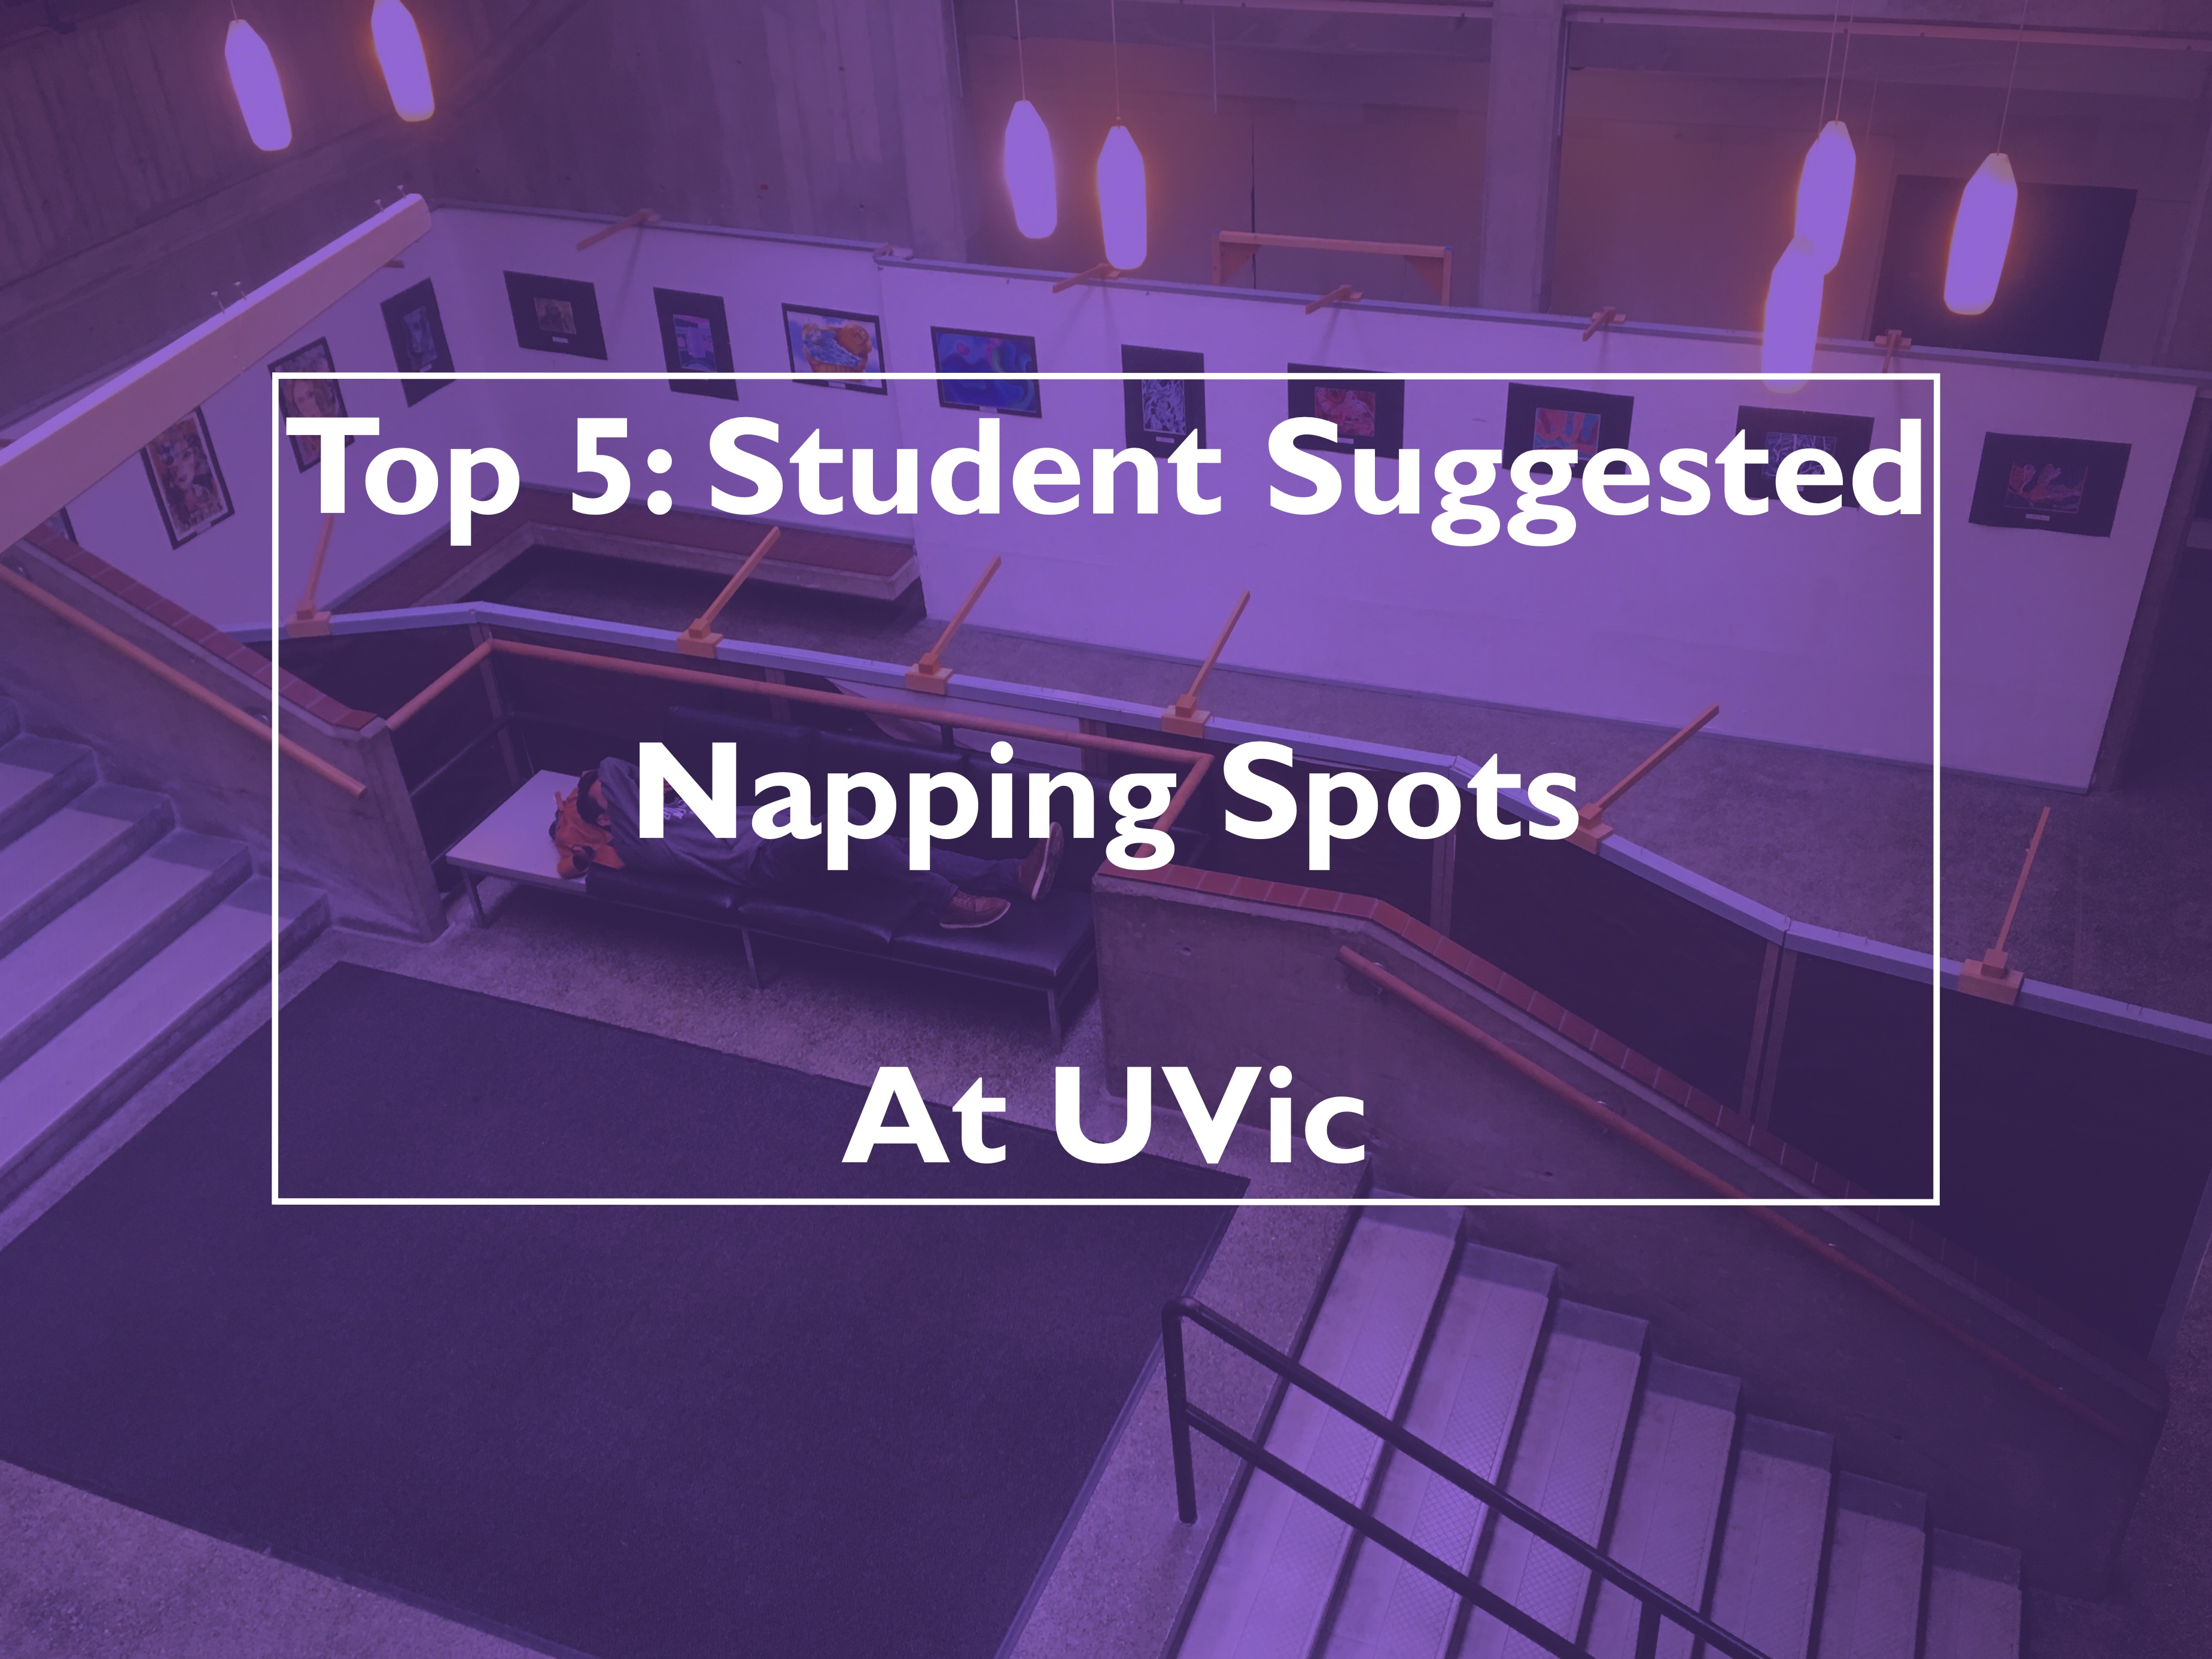 Top 5: Student Suggested Napping Spots at UVic!